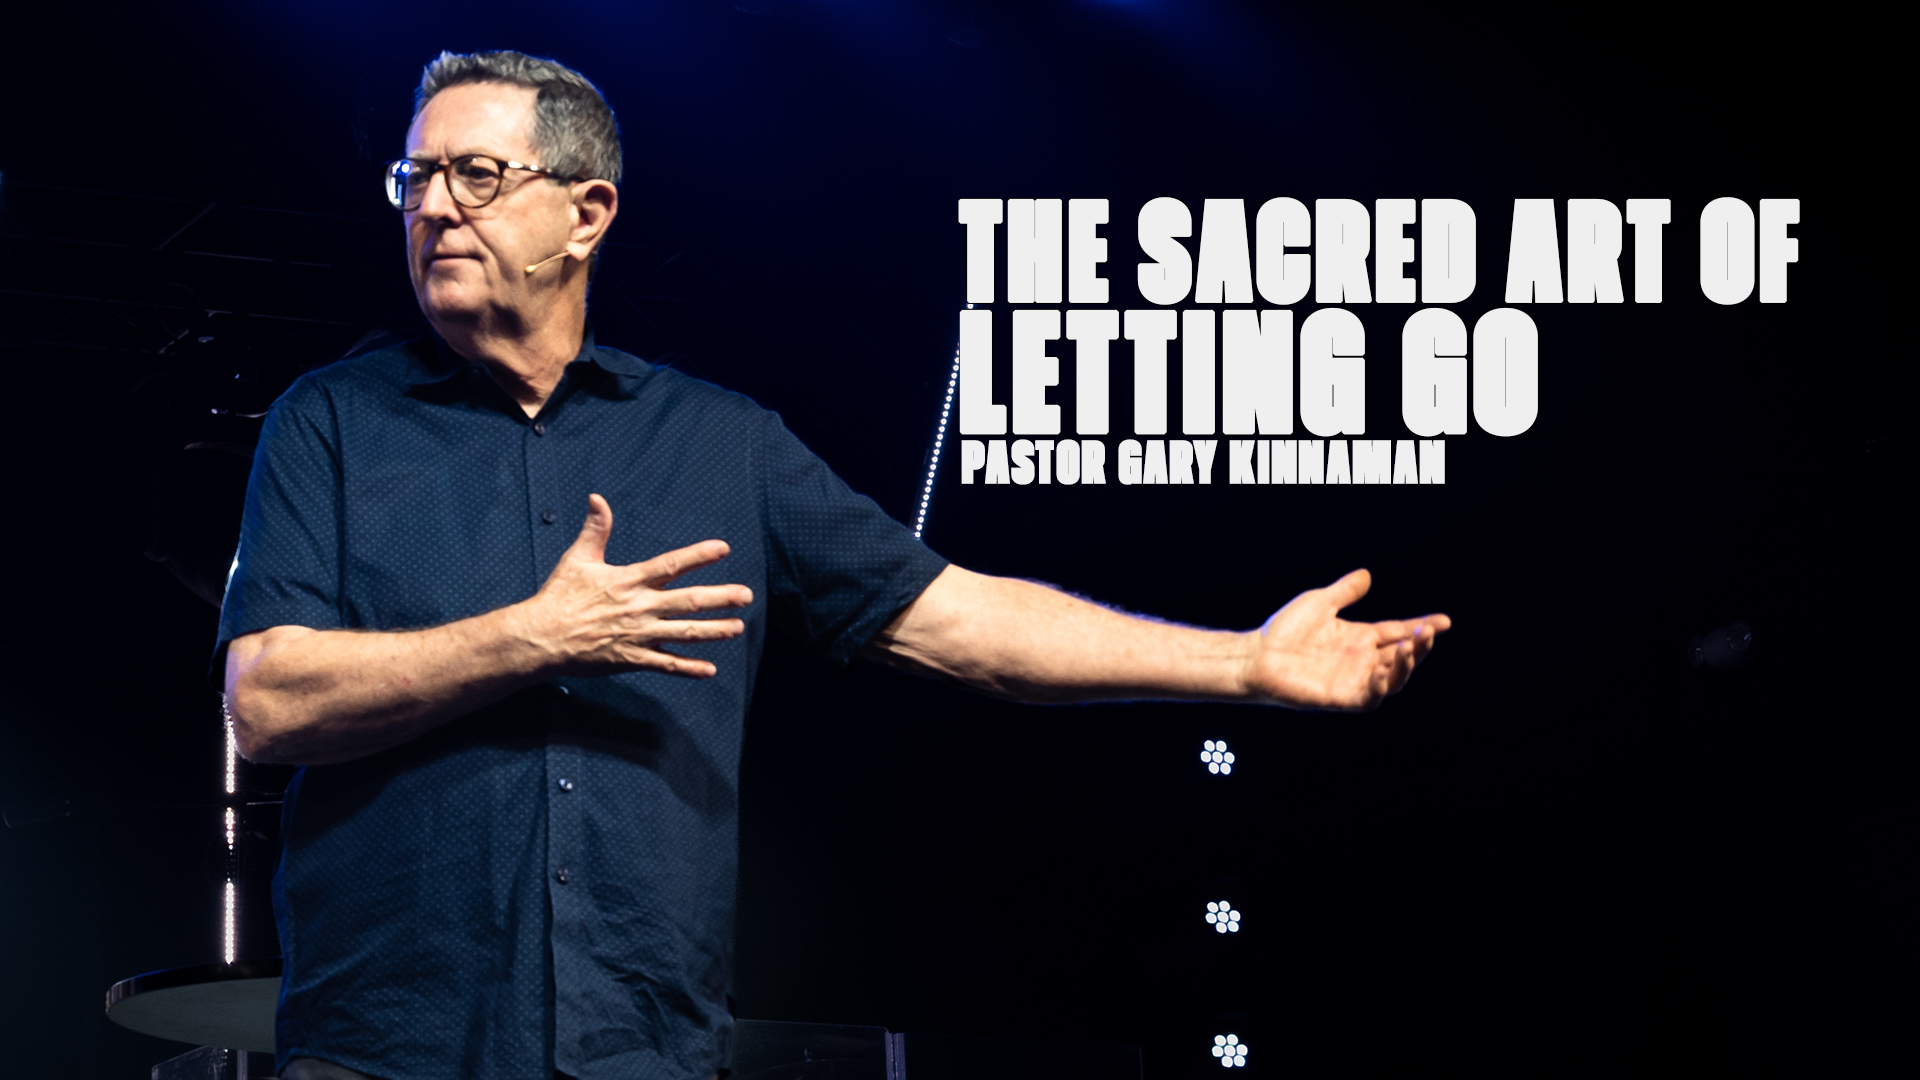 THE SACRED ART OF LETTING GO